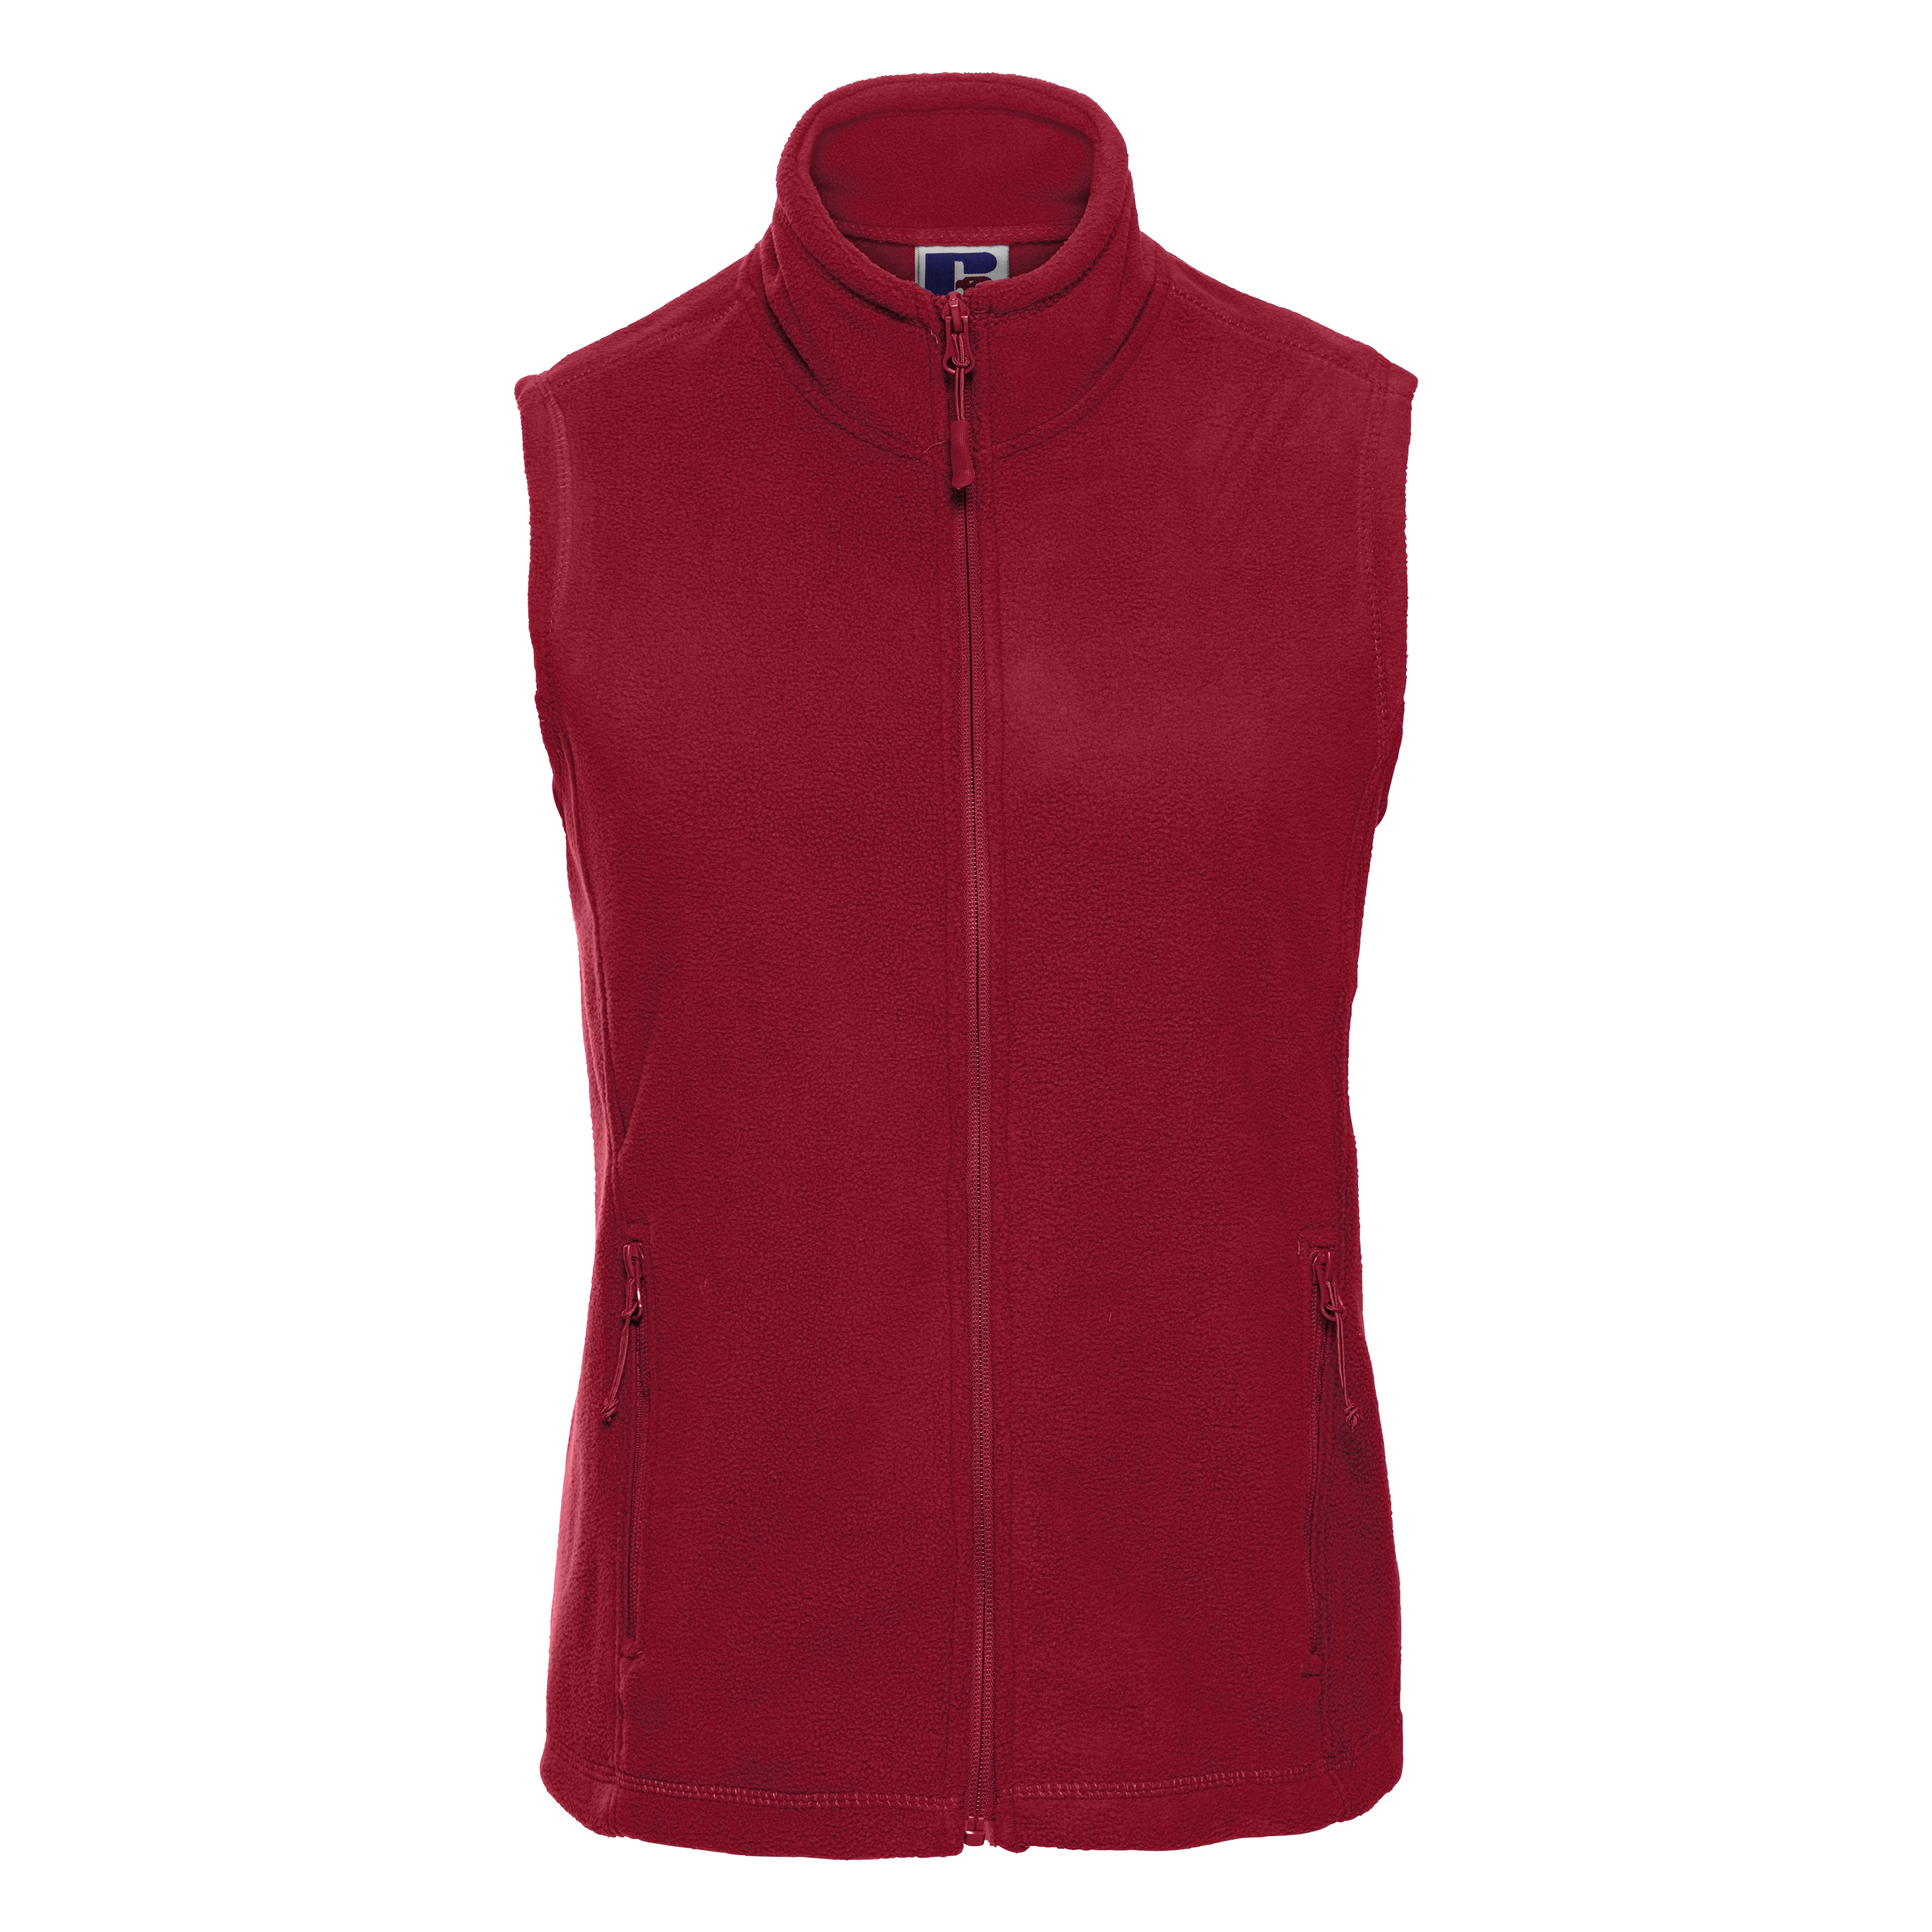 ax-httpswebsystems.s3.amazonaws.comtmp_for_downloadrussell-womens-outdoor-fleece-gilet-classic-red.jpeg